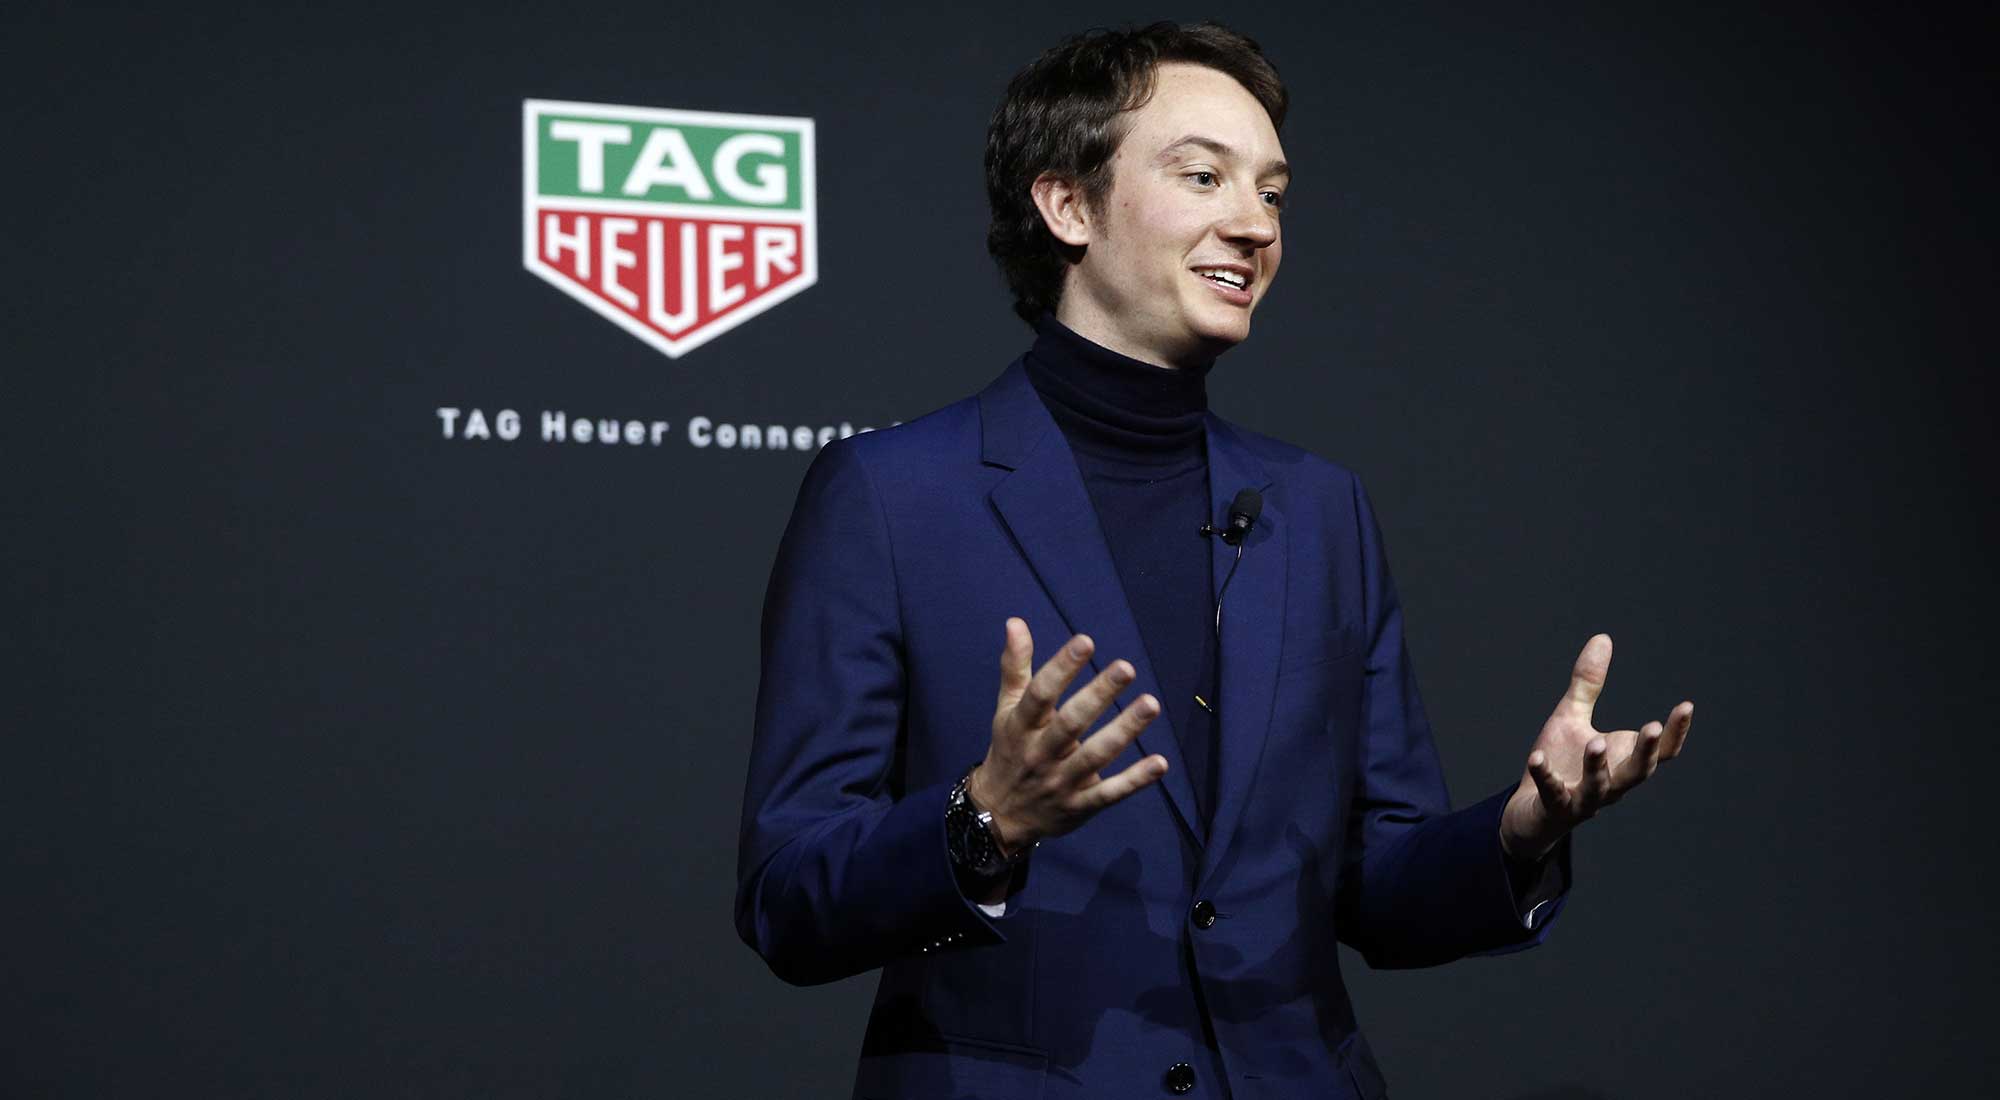 Power Moves, LVMH Names Frédéric Arnault CEO of Tag Heuer, Tommy Hilfiger  CEO Exits